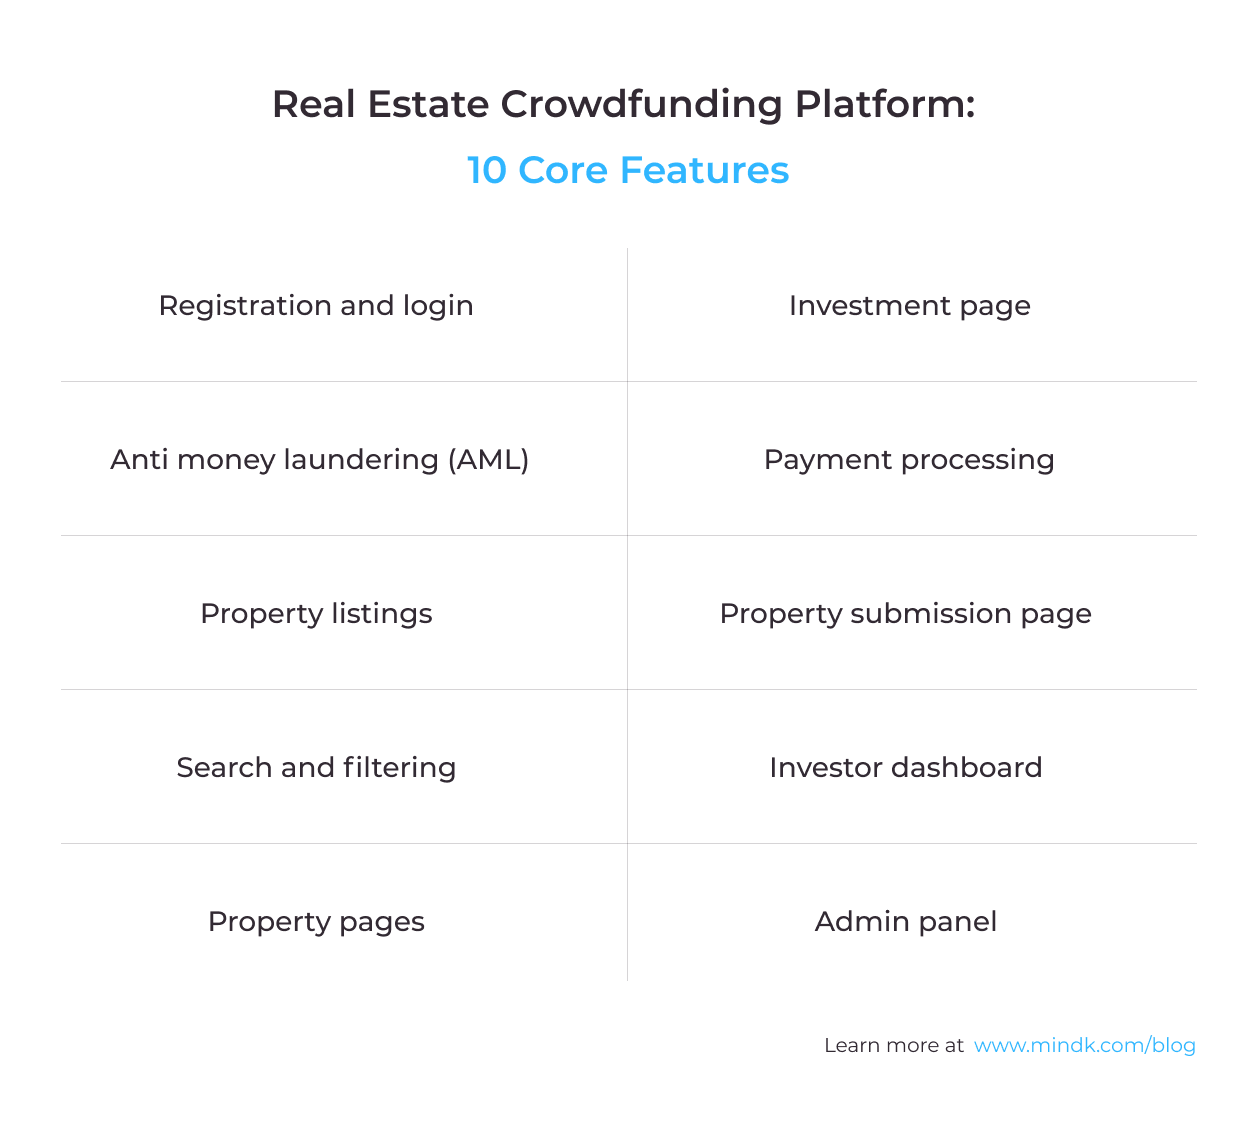 Reeal estate crowdfunding features